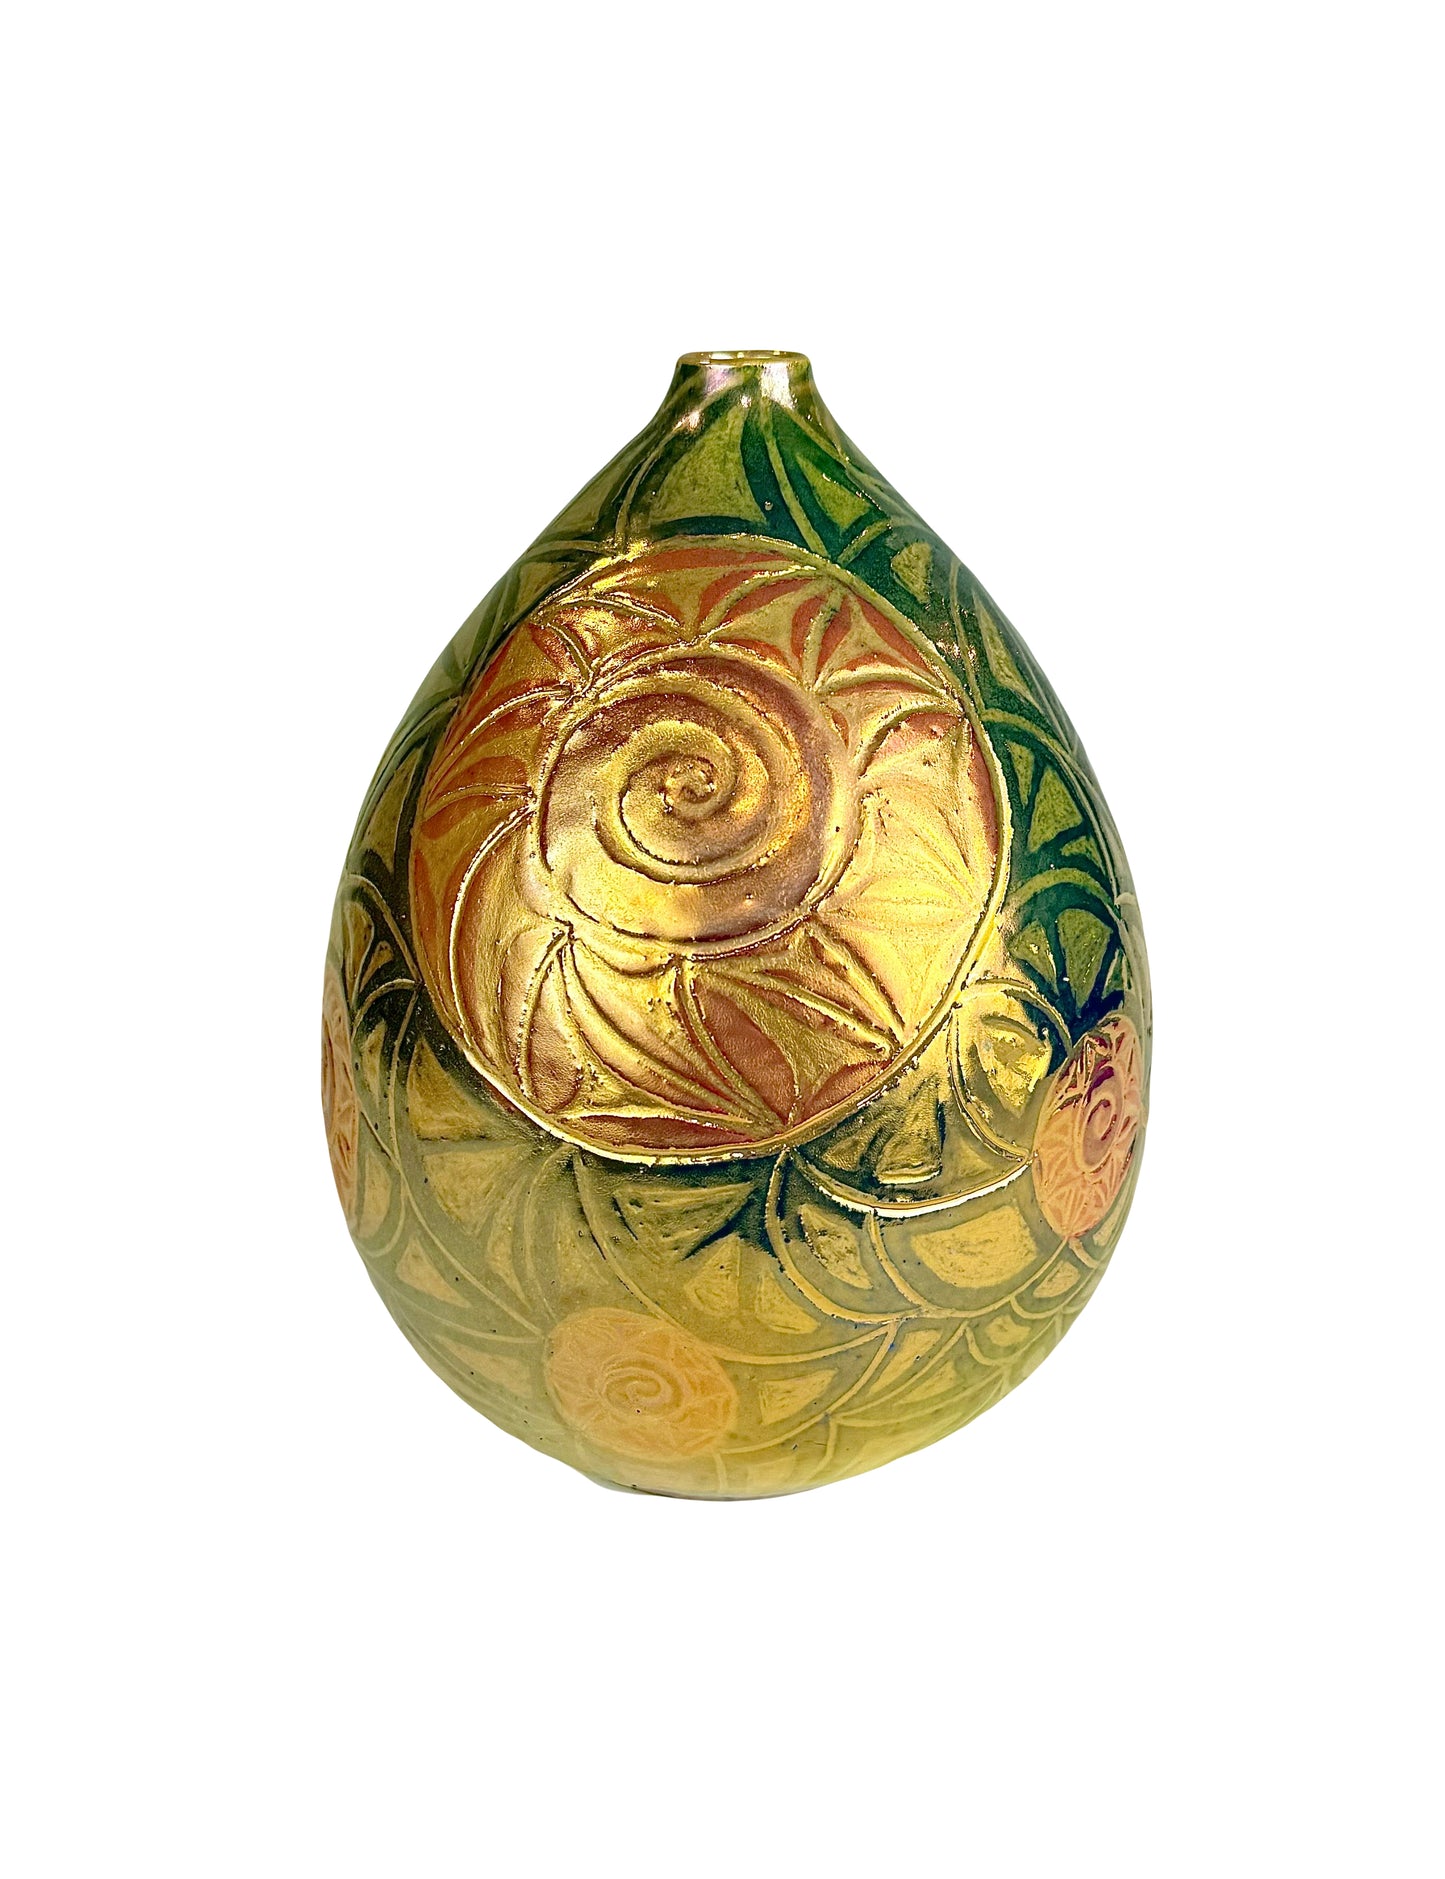 Gold Luster Vase with Colored Engobes and a Sgraffito Swirl Design